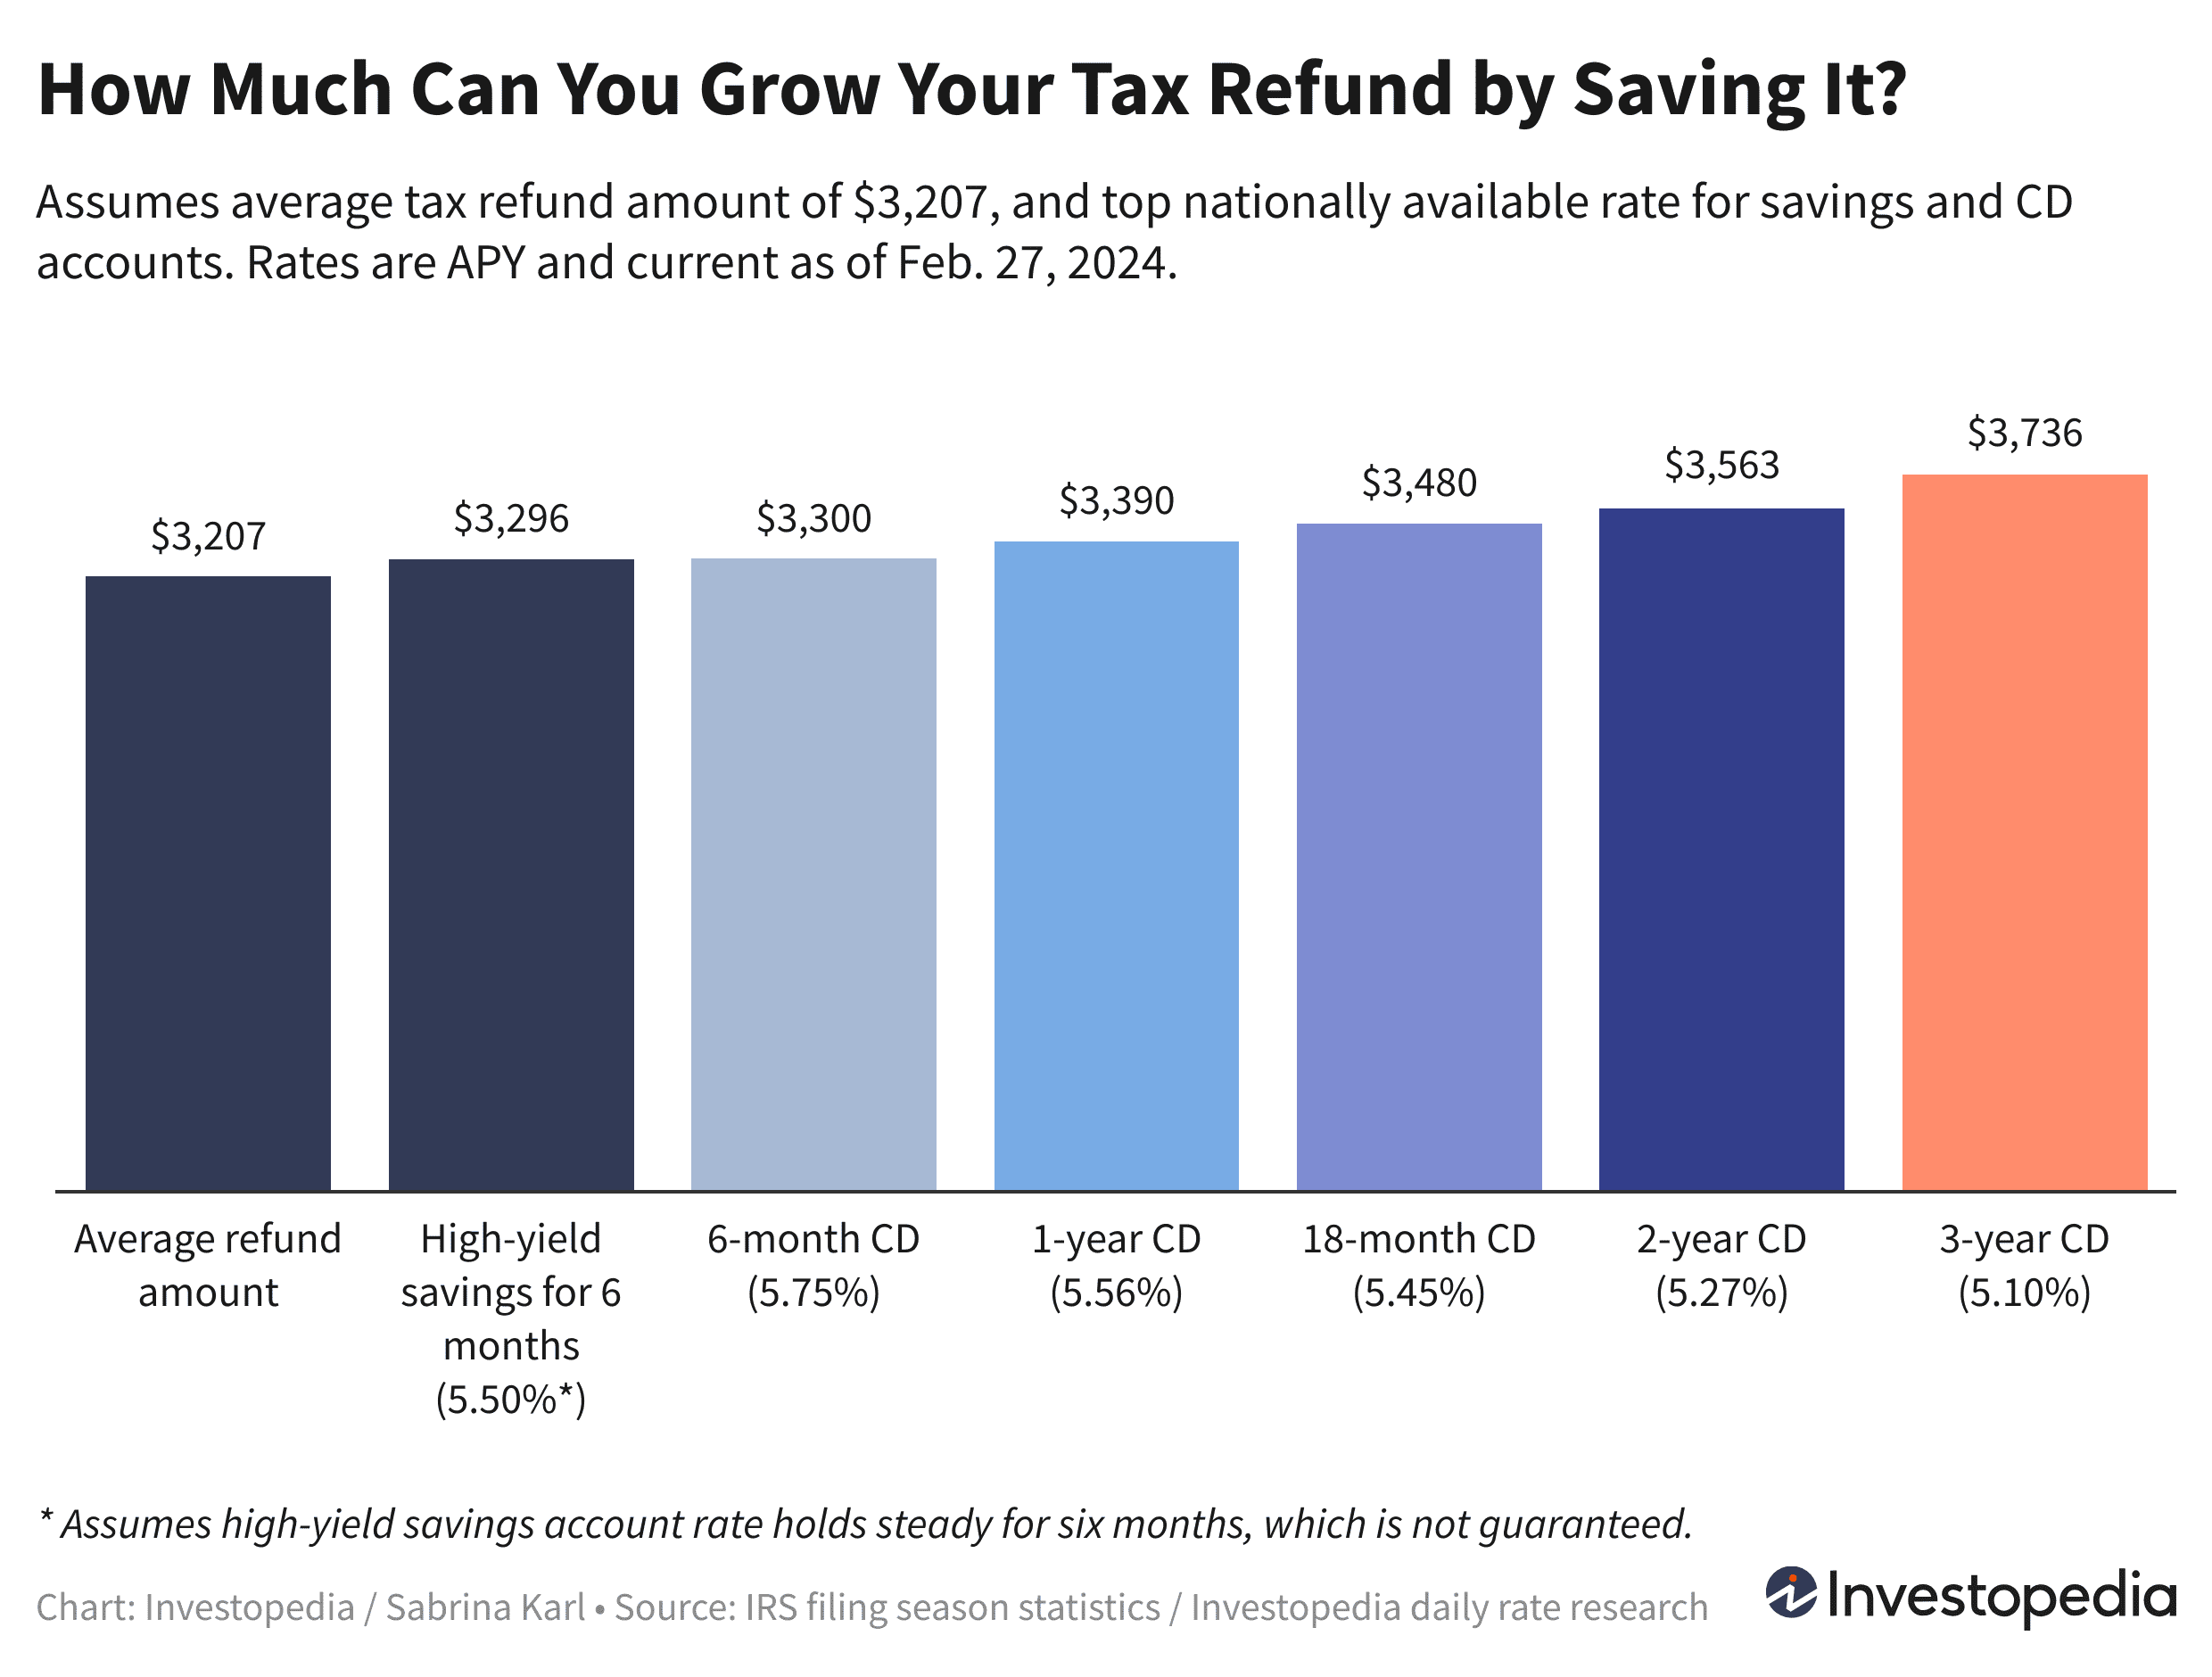 Bar graph showing what the average tax refund of $3,207 would be worth if you saved in a high-yield account or a CD.